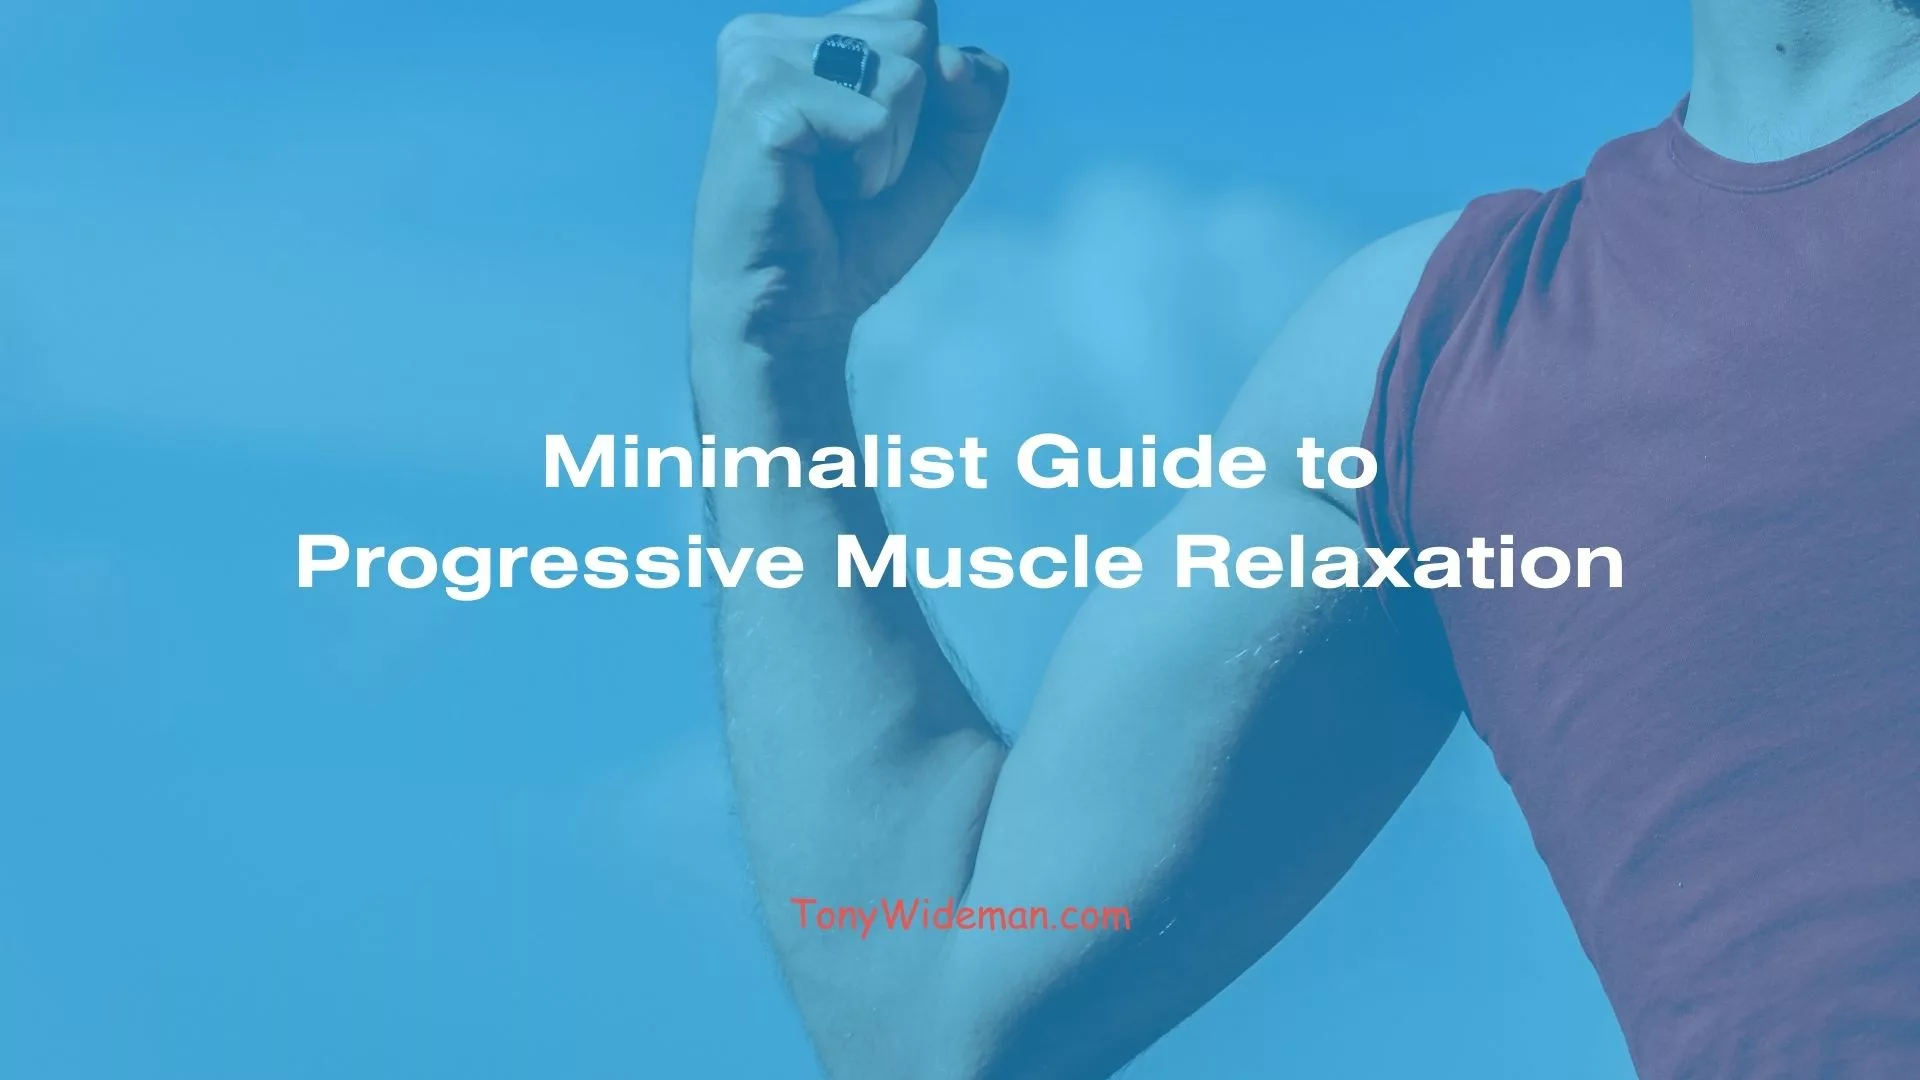 Minimalist Guide to Progressive Muscle Relaxation